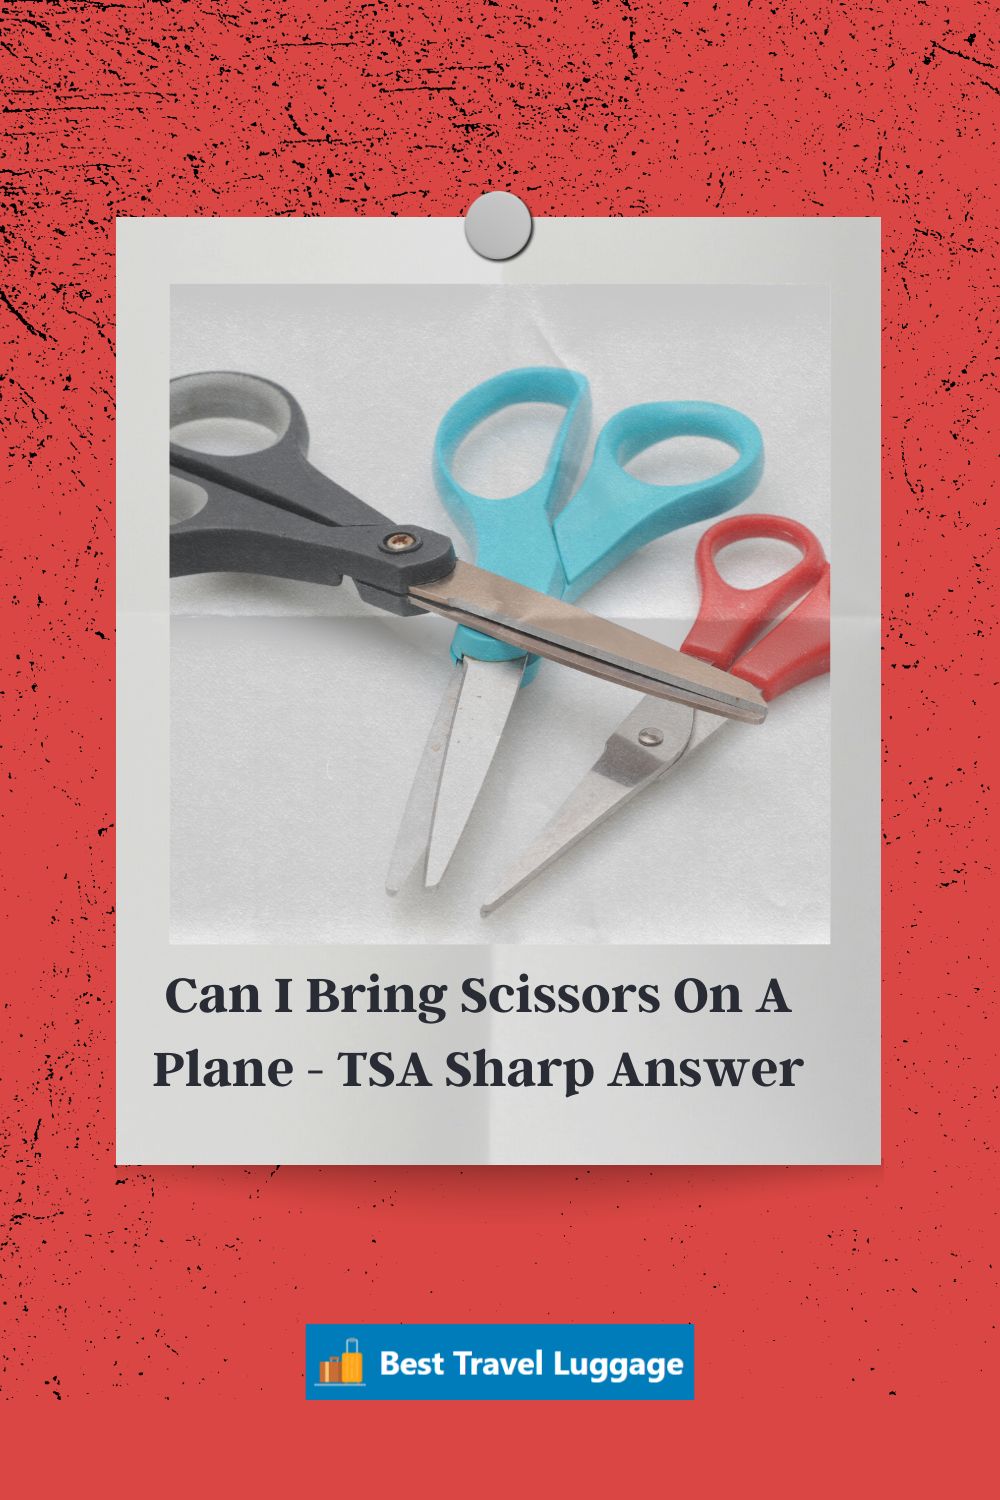 Can I bring scissors on a plane pin